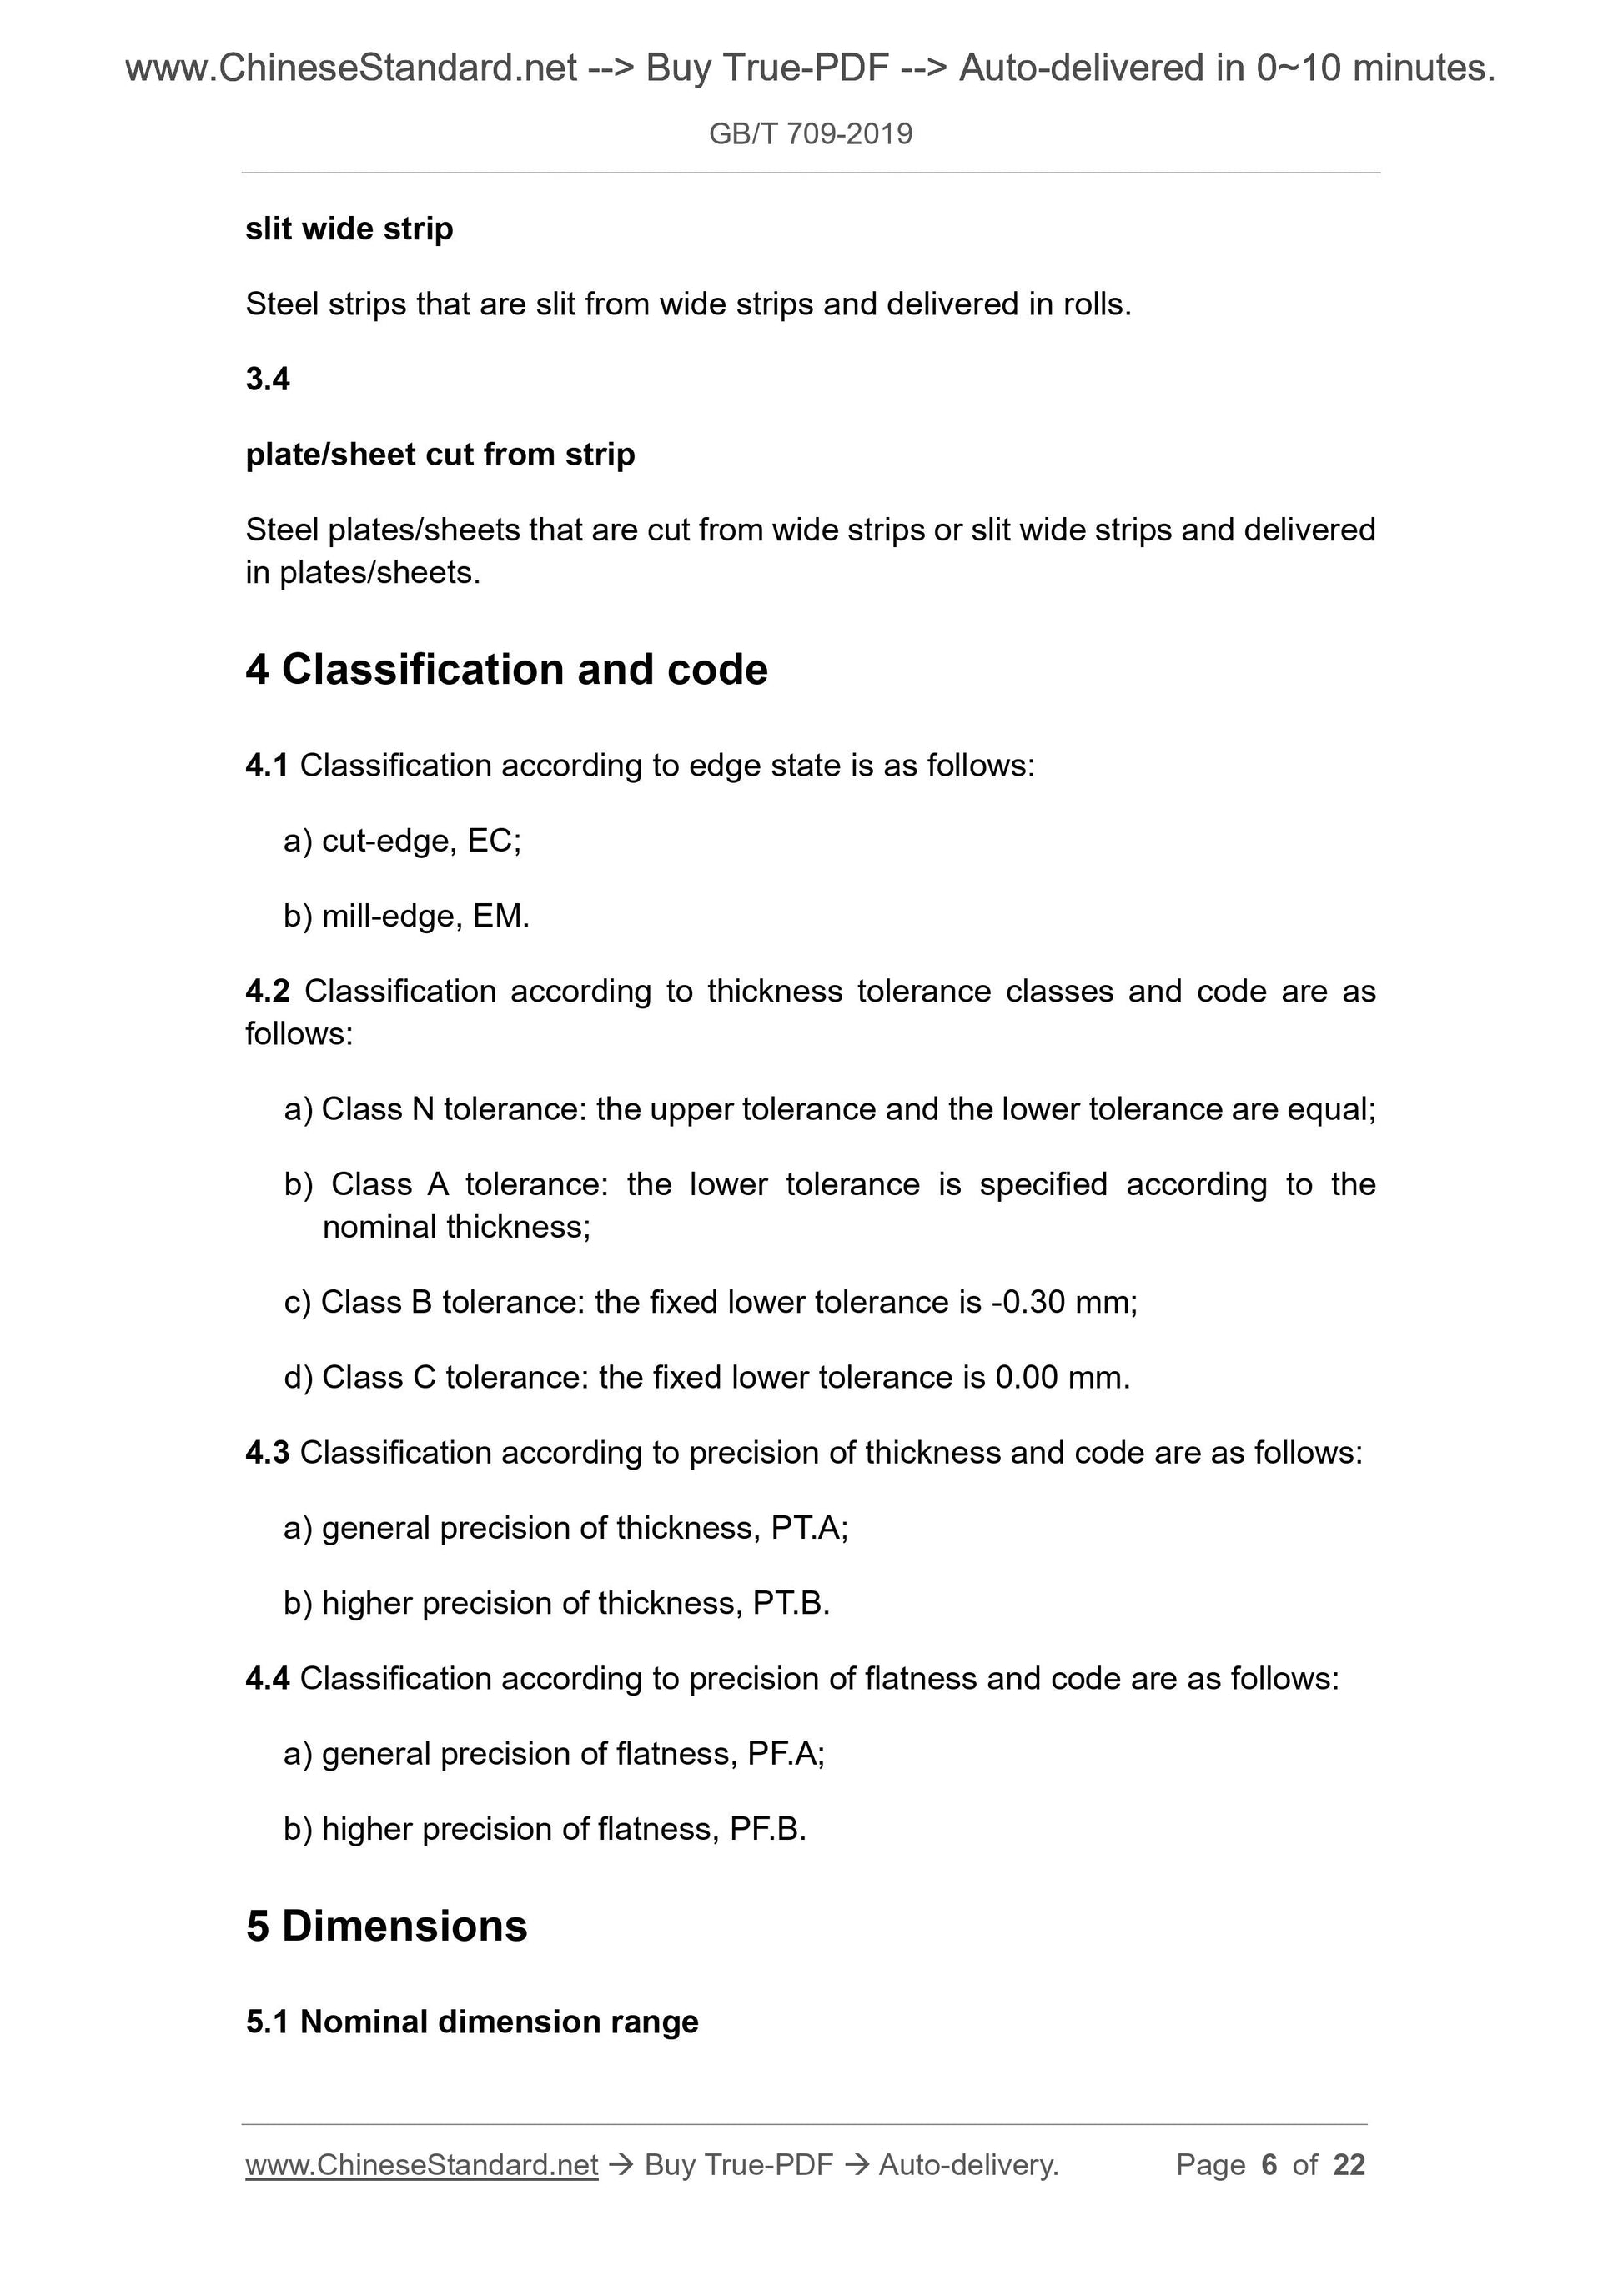 GB/T 709-2019 Page 4